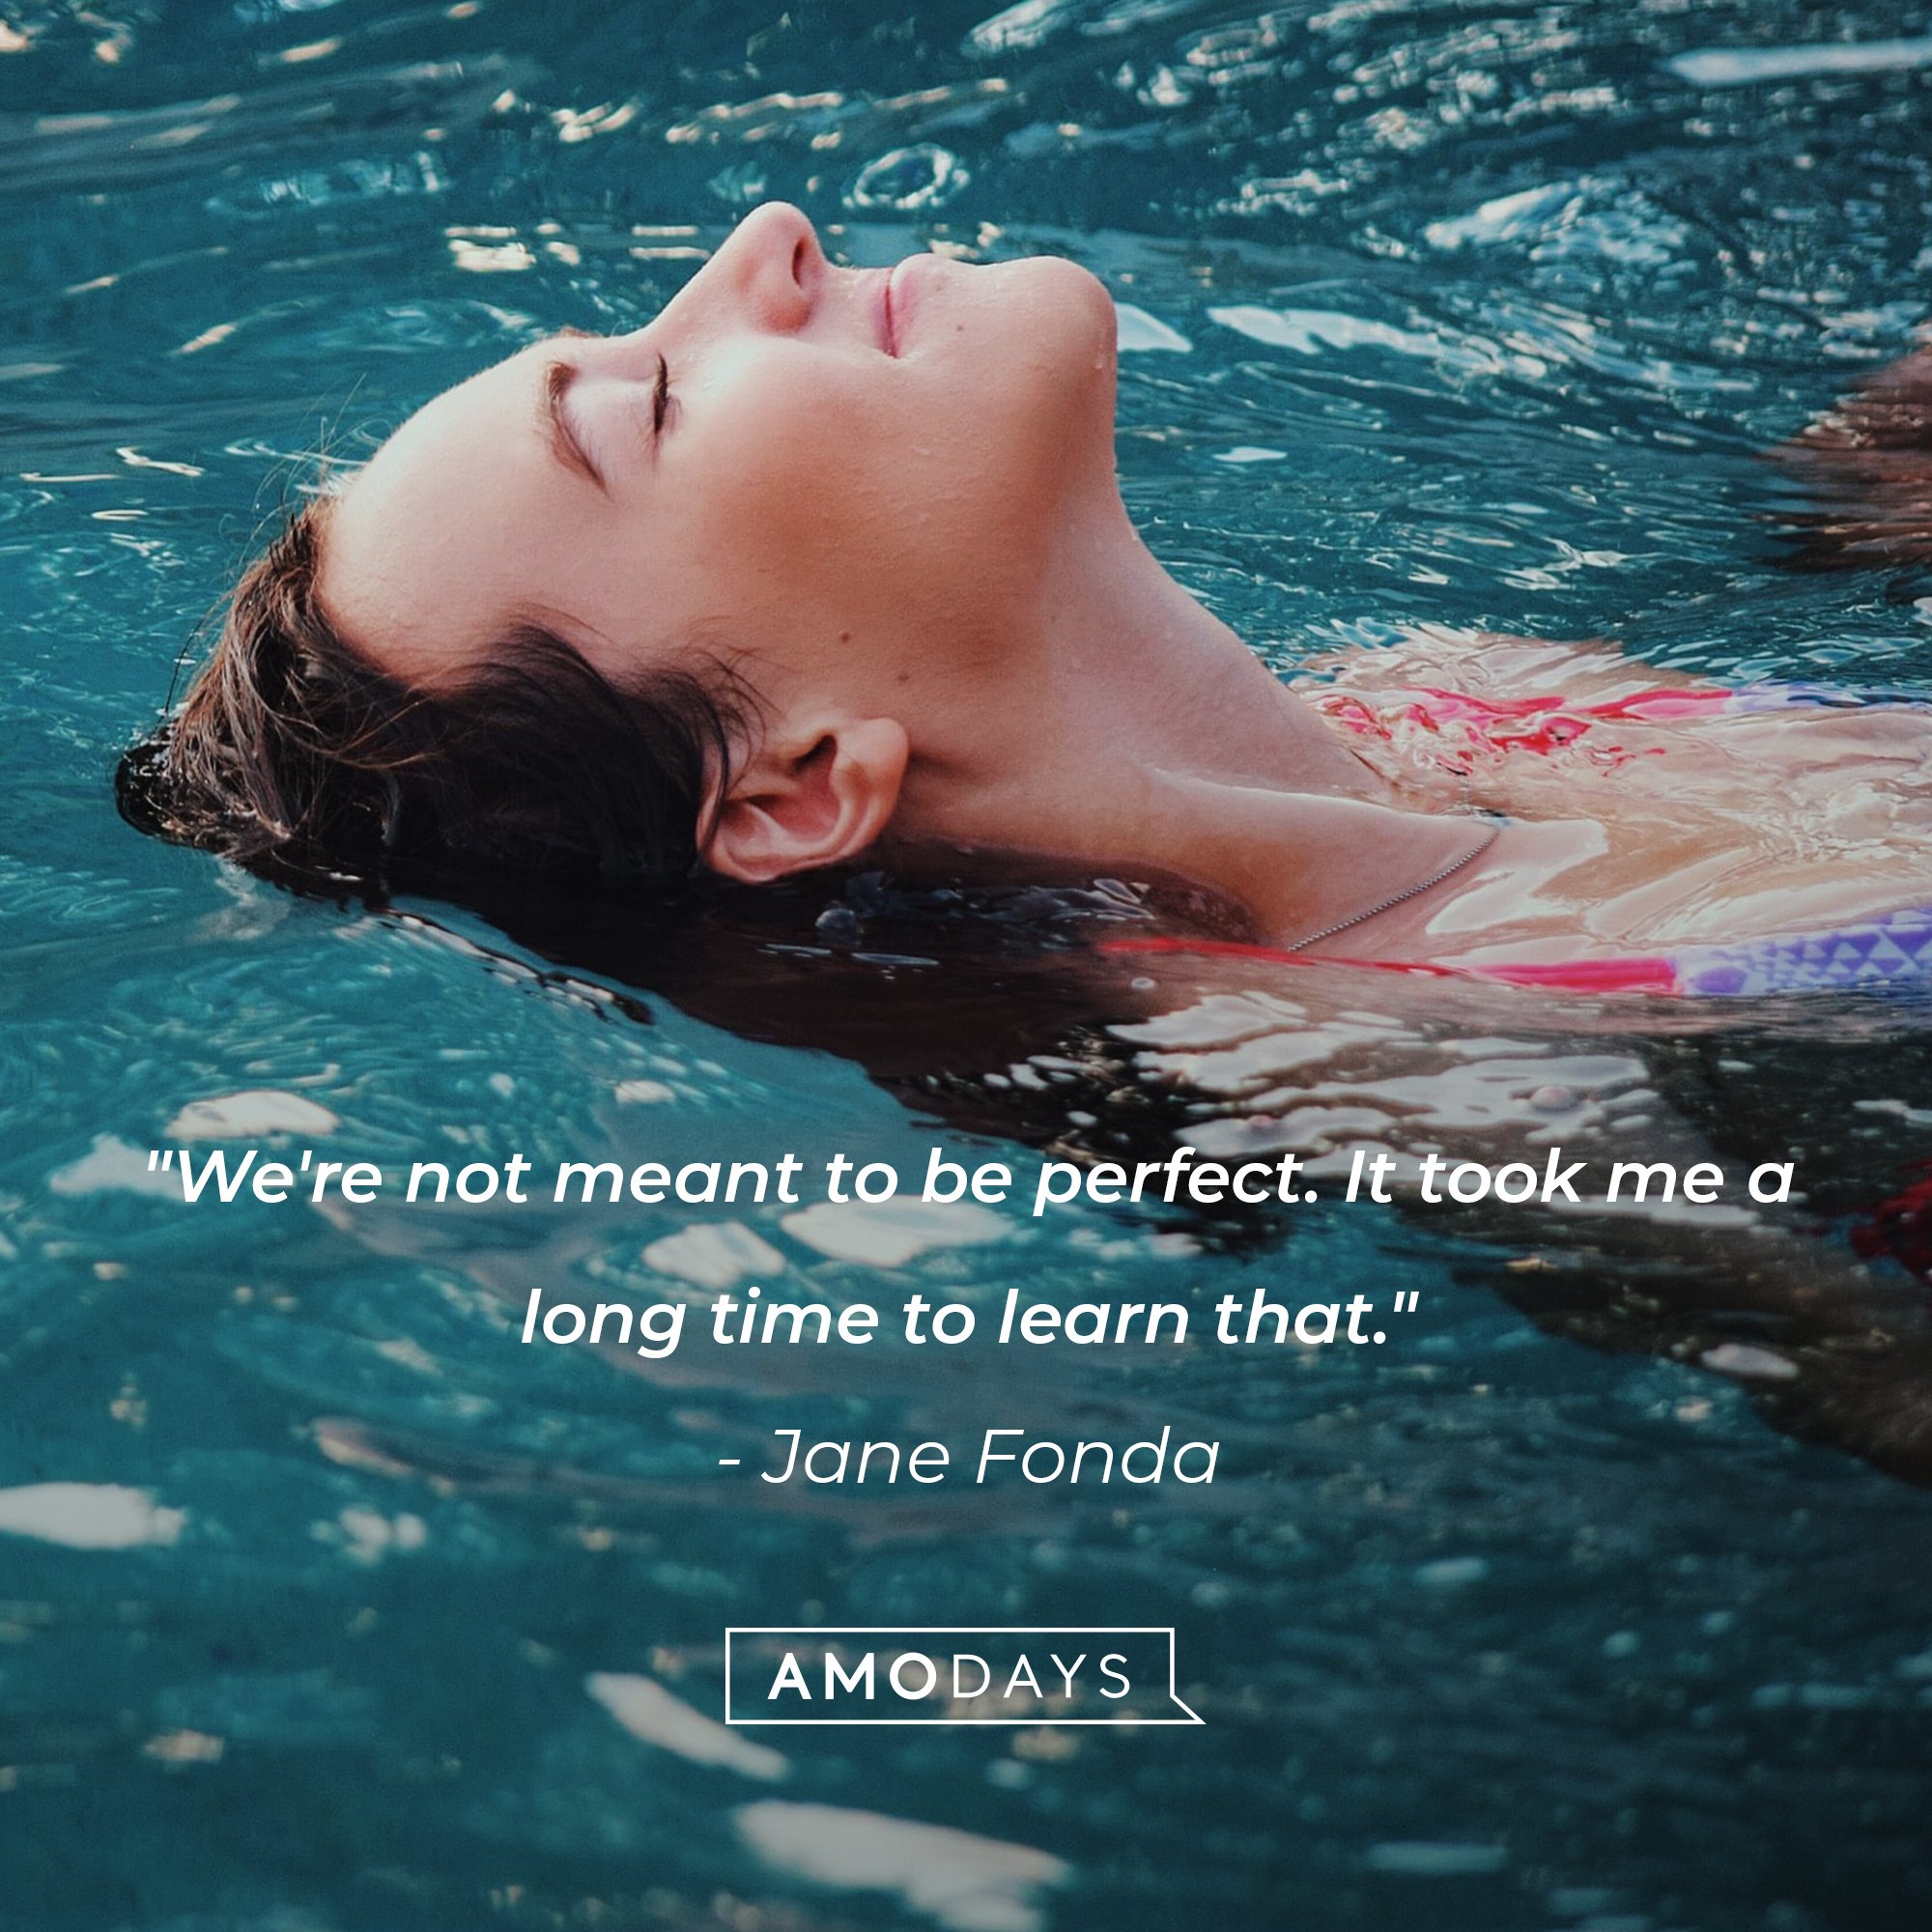 Jane Fonda’s quote: "We're not meant to be perfect. It took me a long time to learn that." | Image: AmoDays 